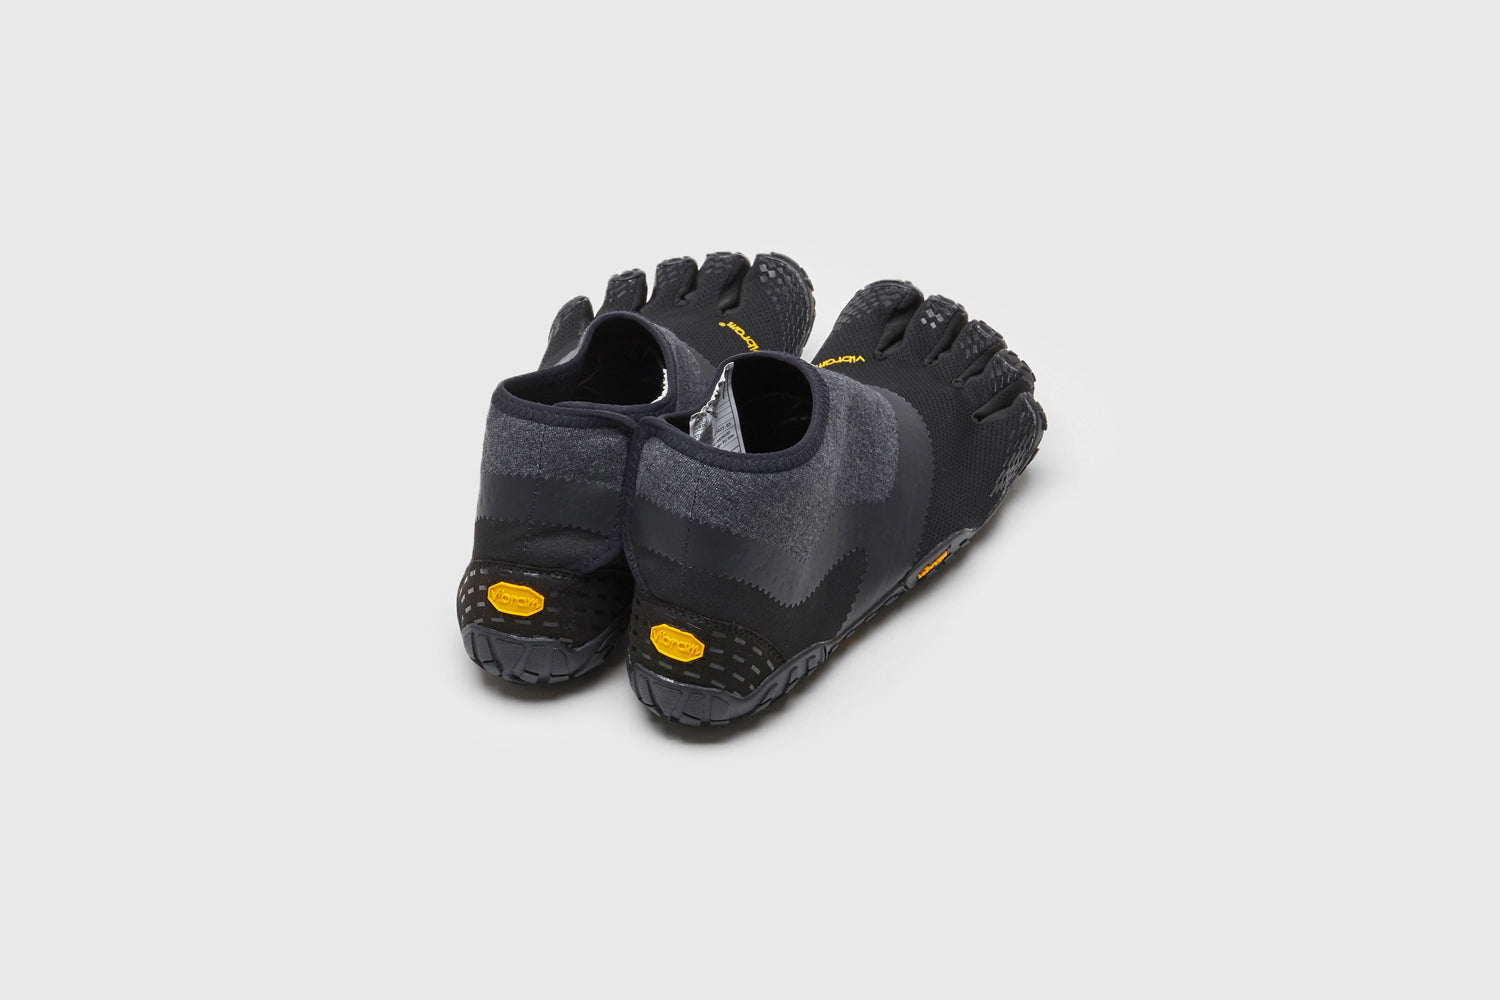 SUICOKE NIN-LO shoes with black nylon upper, black midsole and sole, strap and logo patch. From Spring/Summer 2023 collection on eightywingold Web Store, an official partner of SUICOKE. S20WLC BLACK